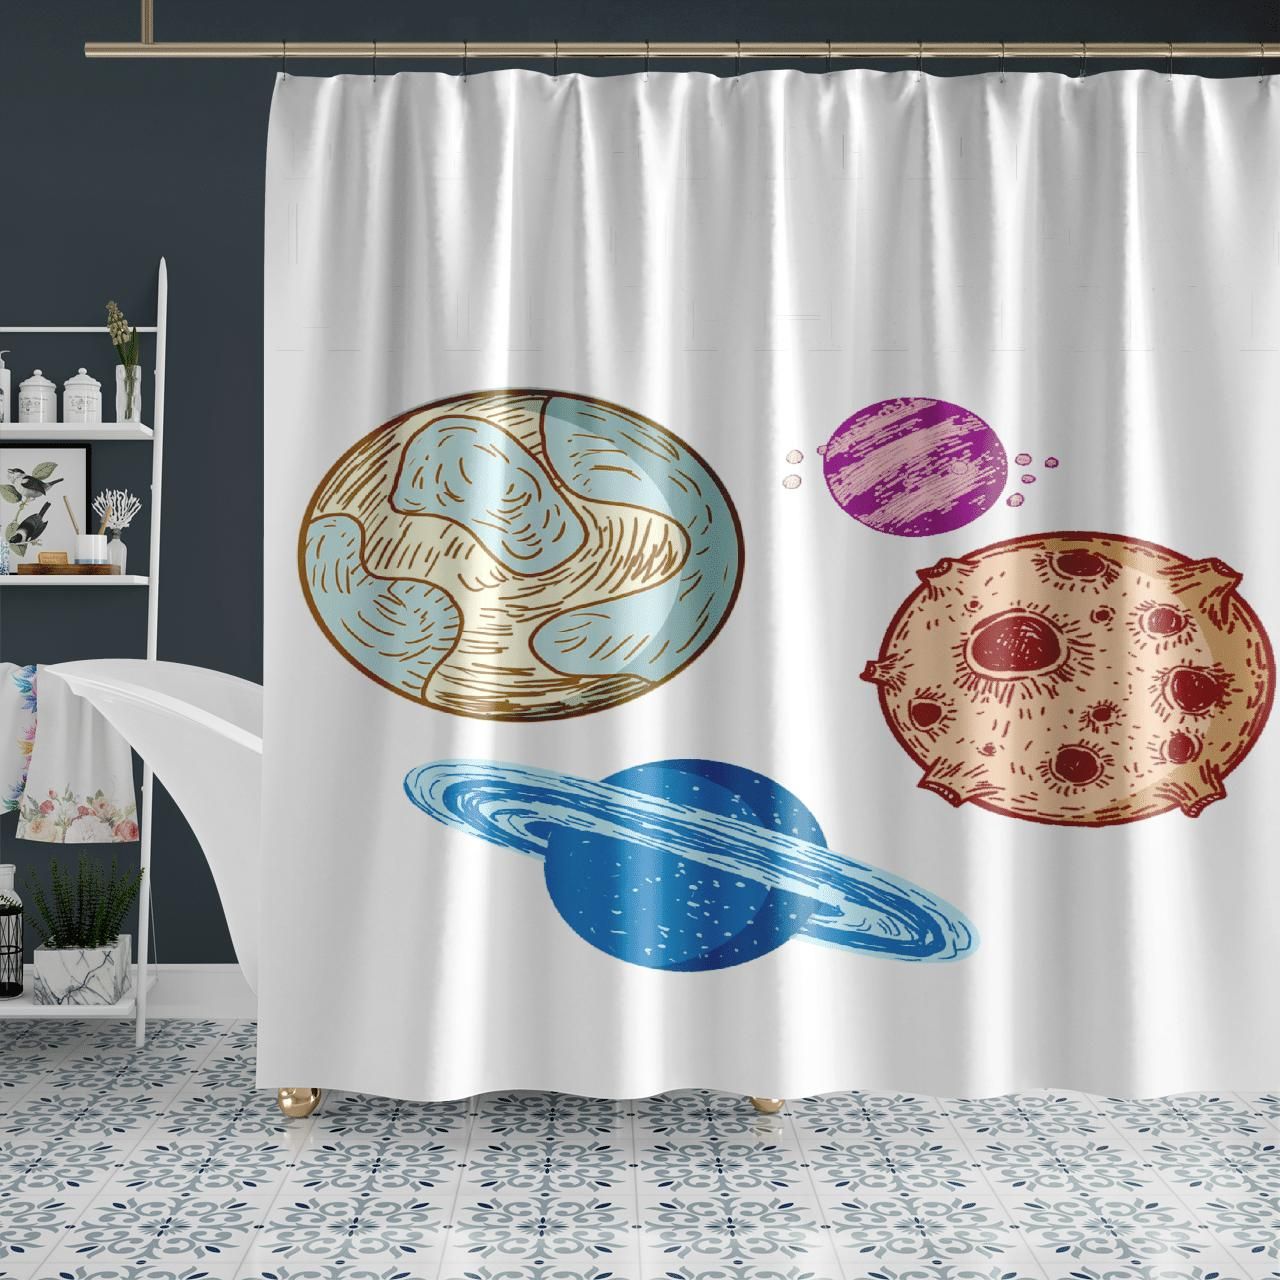 Forget Princess I Want To Be An Astrophysicist Shower Curtain